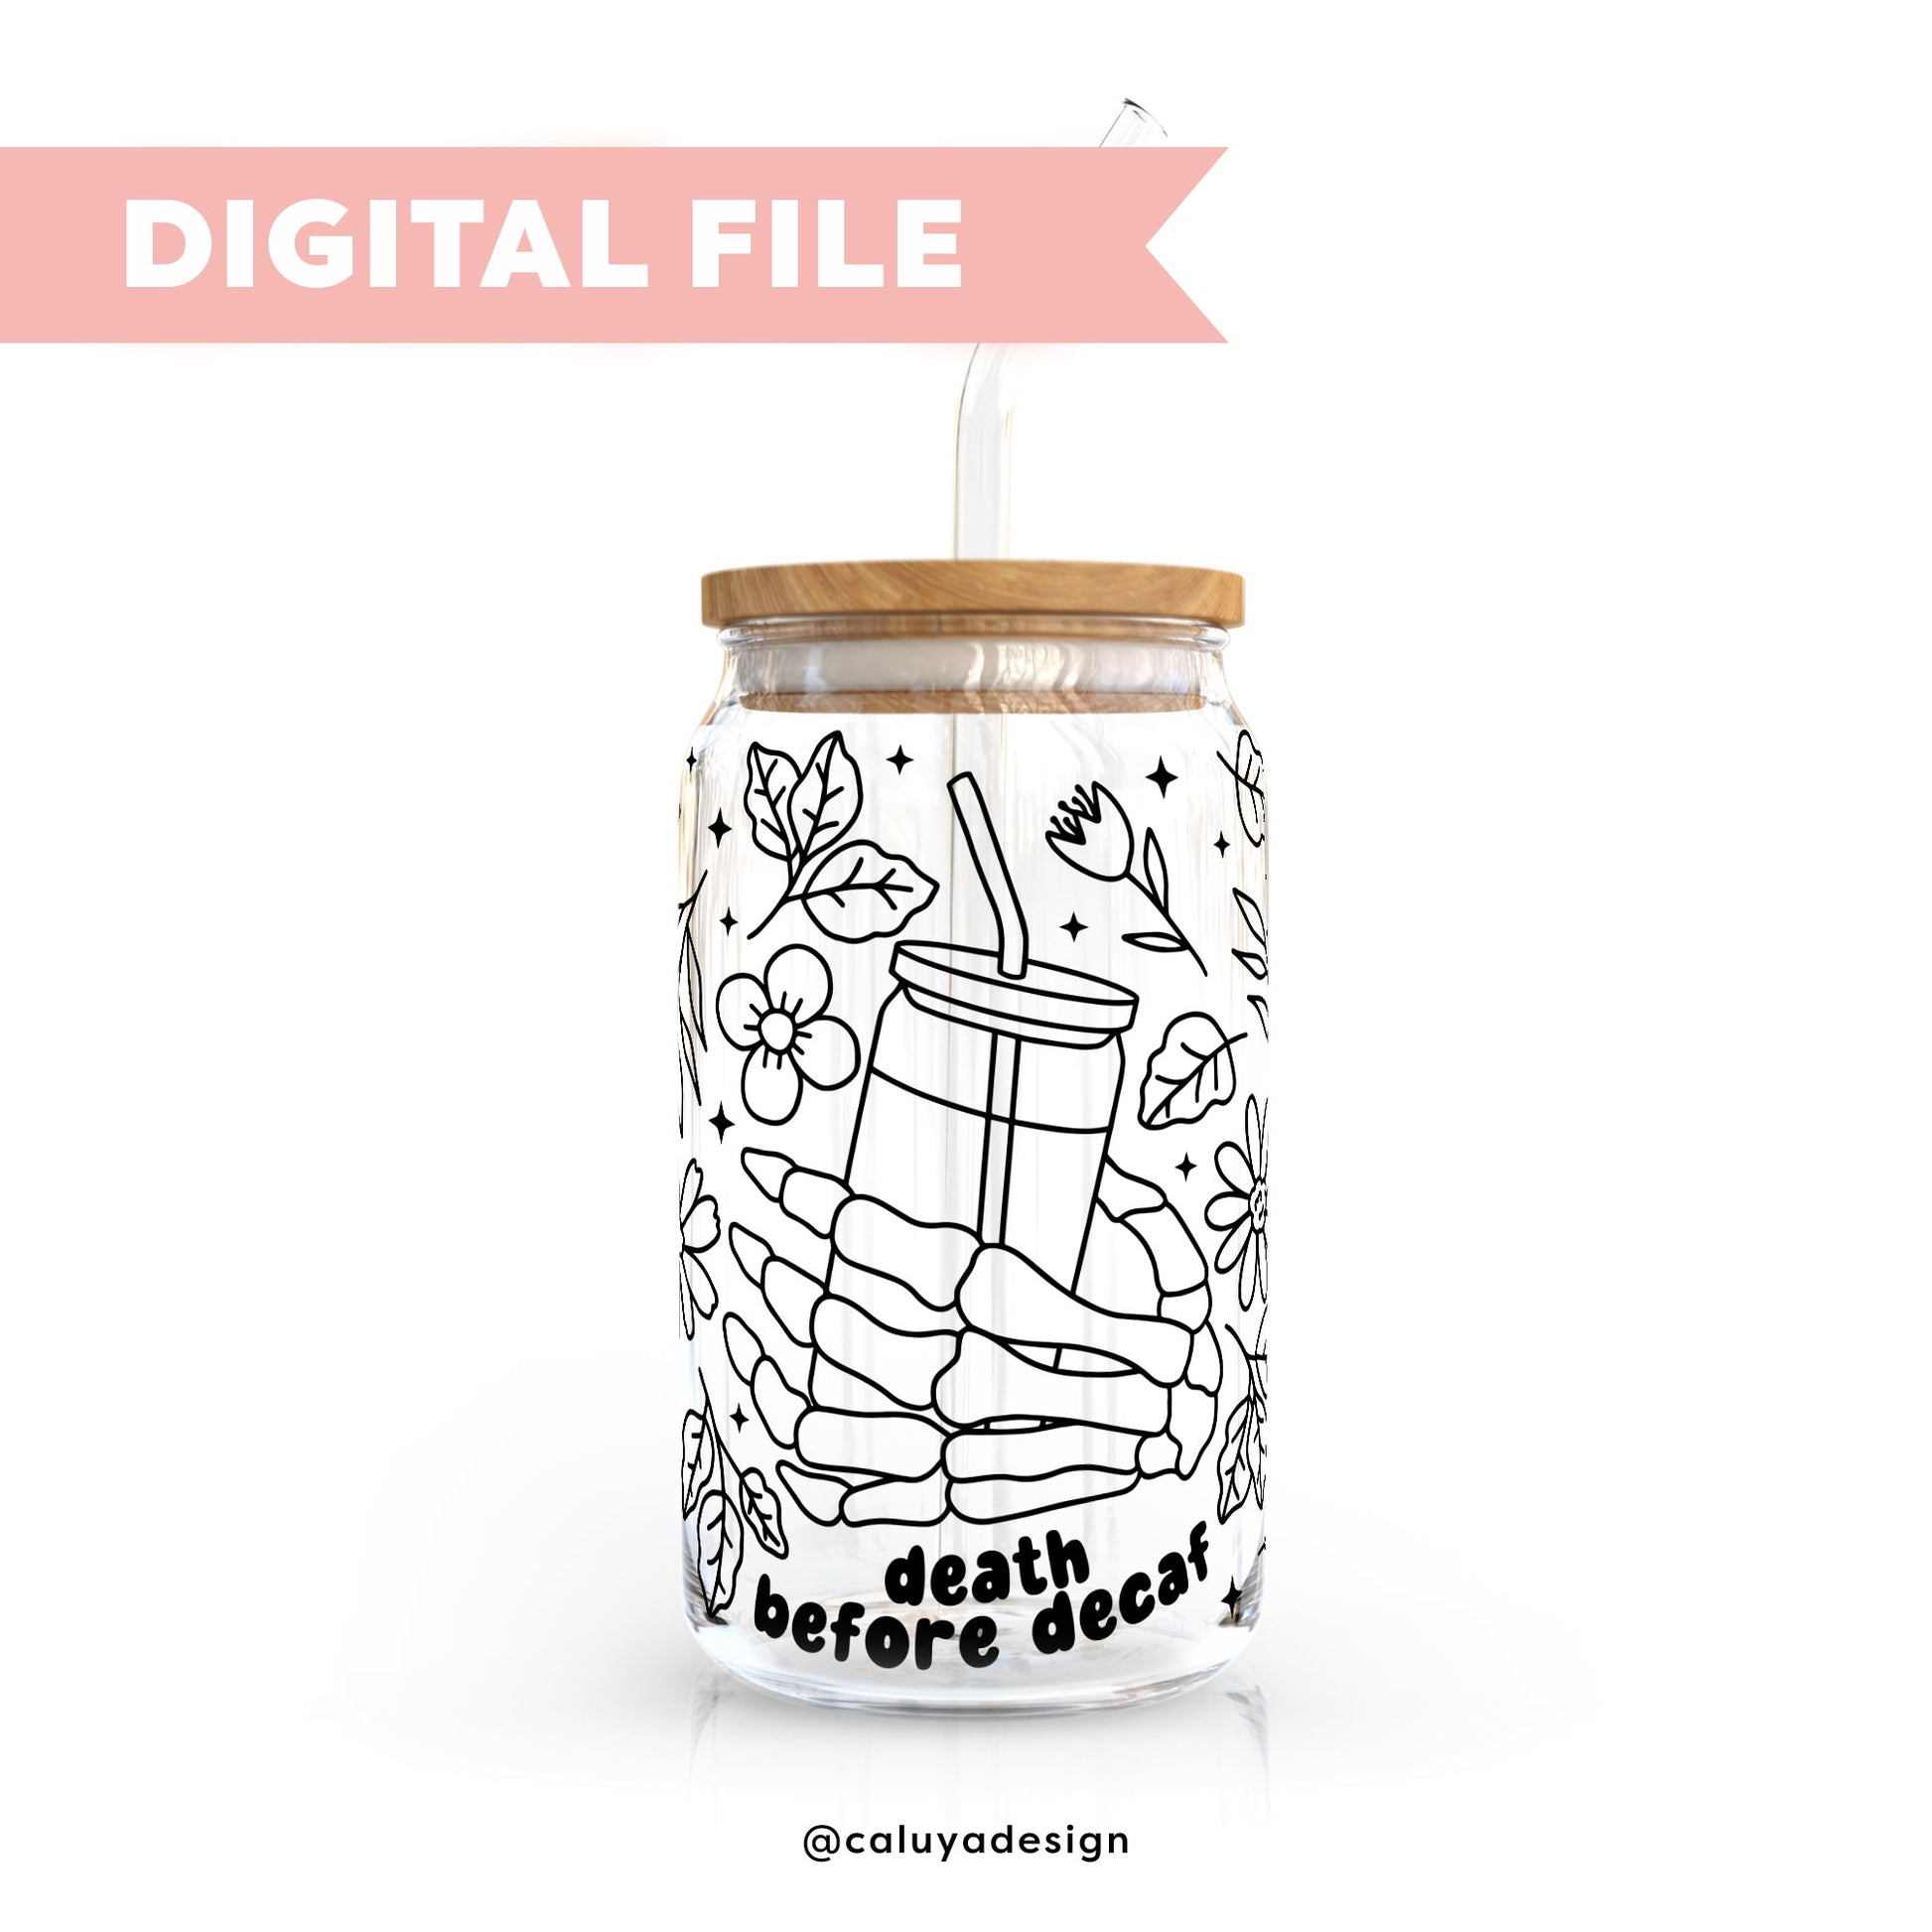 16oz Libbey Can Cup Wrap SVG | Death Before Decaf SVG 